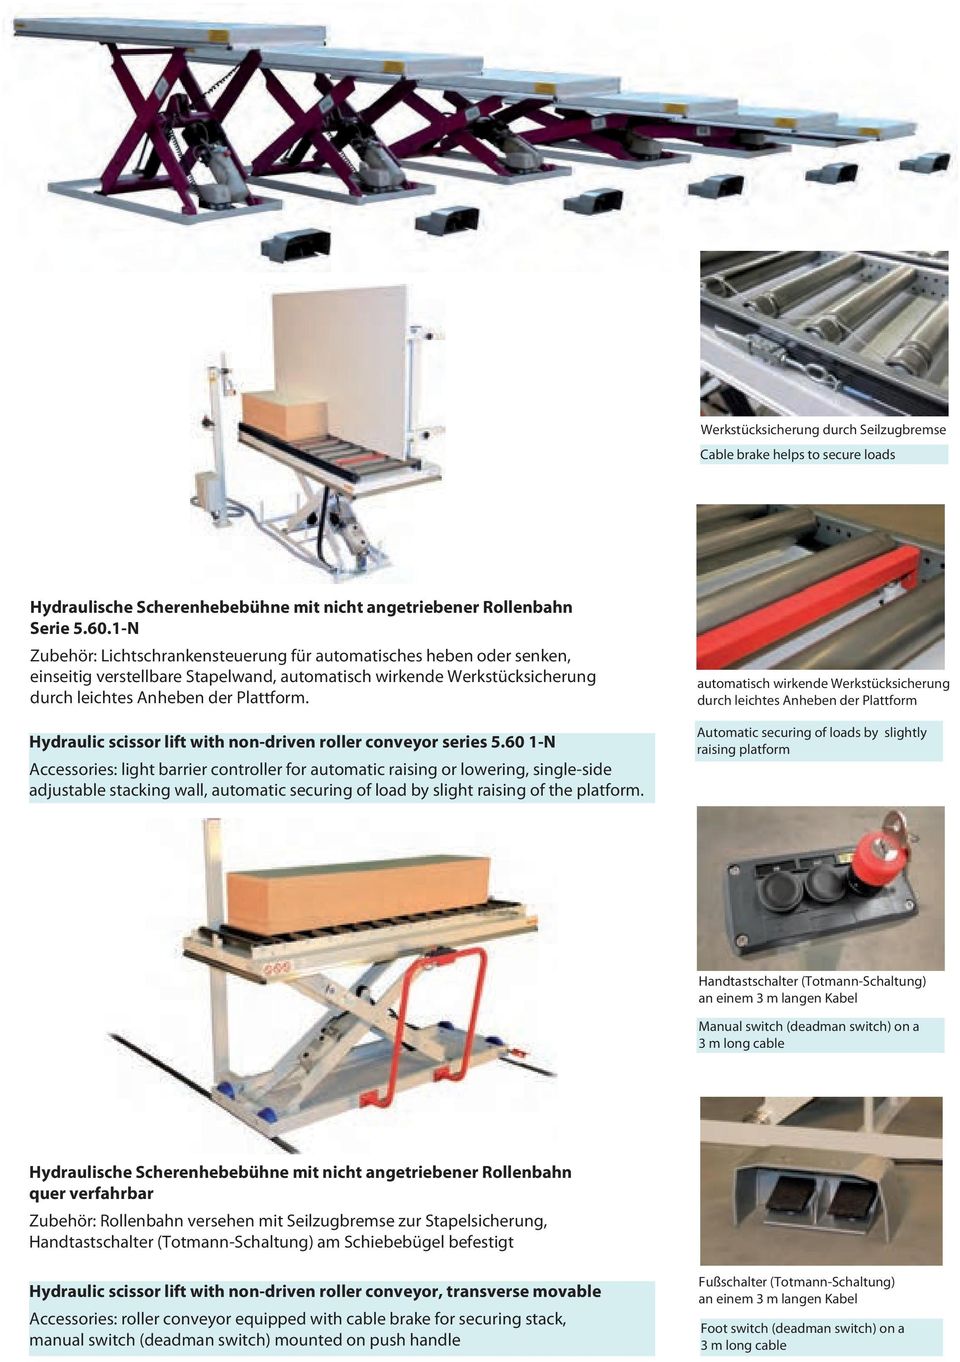 Hydraulic scissor lift with non-driven roller conveyor series 5.